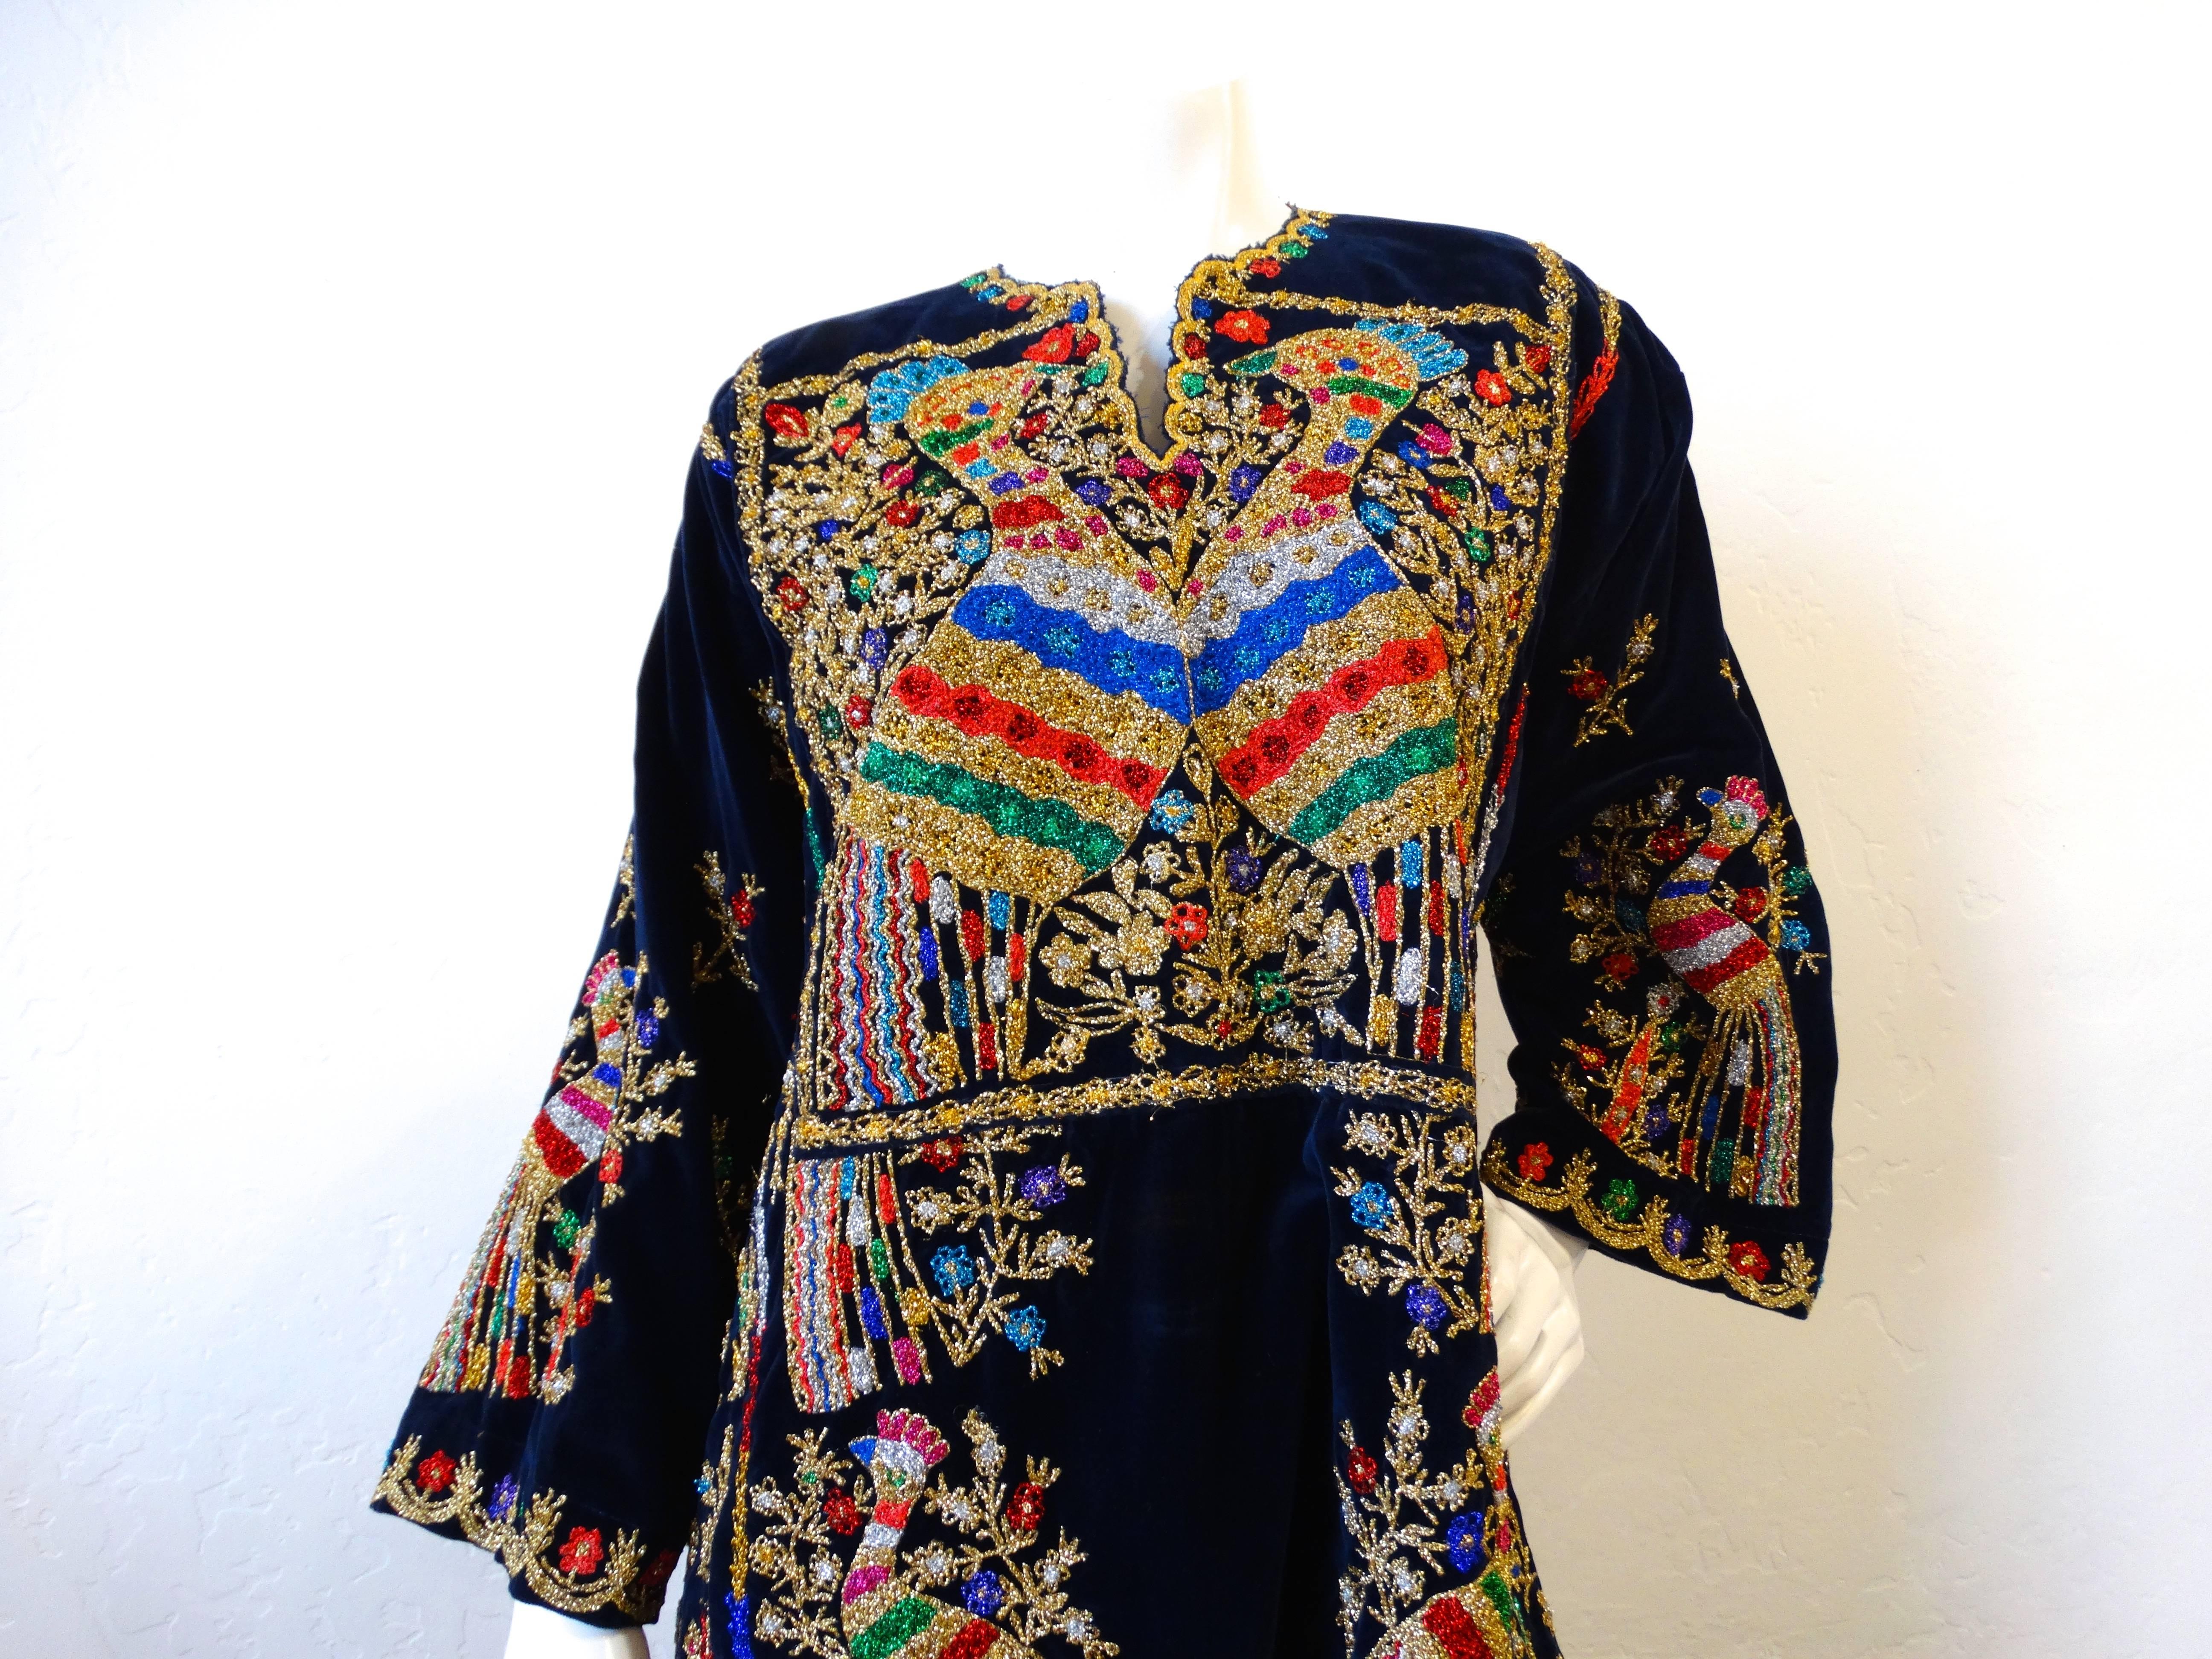 Incredible 1970s Middle Eastern- India designed hand embroidered kaftan! Deep, dark blue velvet fabric with rainbow and gold embroidery throughout. Intricate metallic hand stitched peacocks, flowers, foliage-on the bust, down the skirt and on each